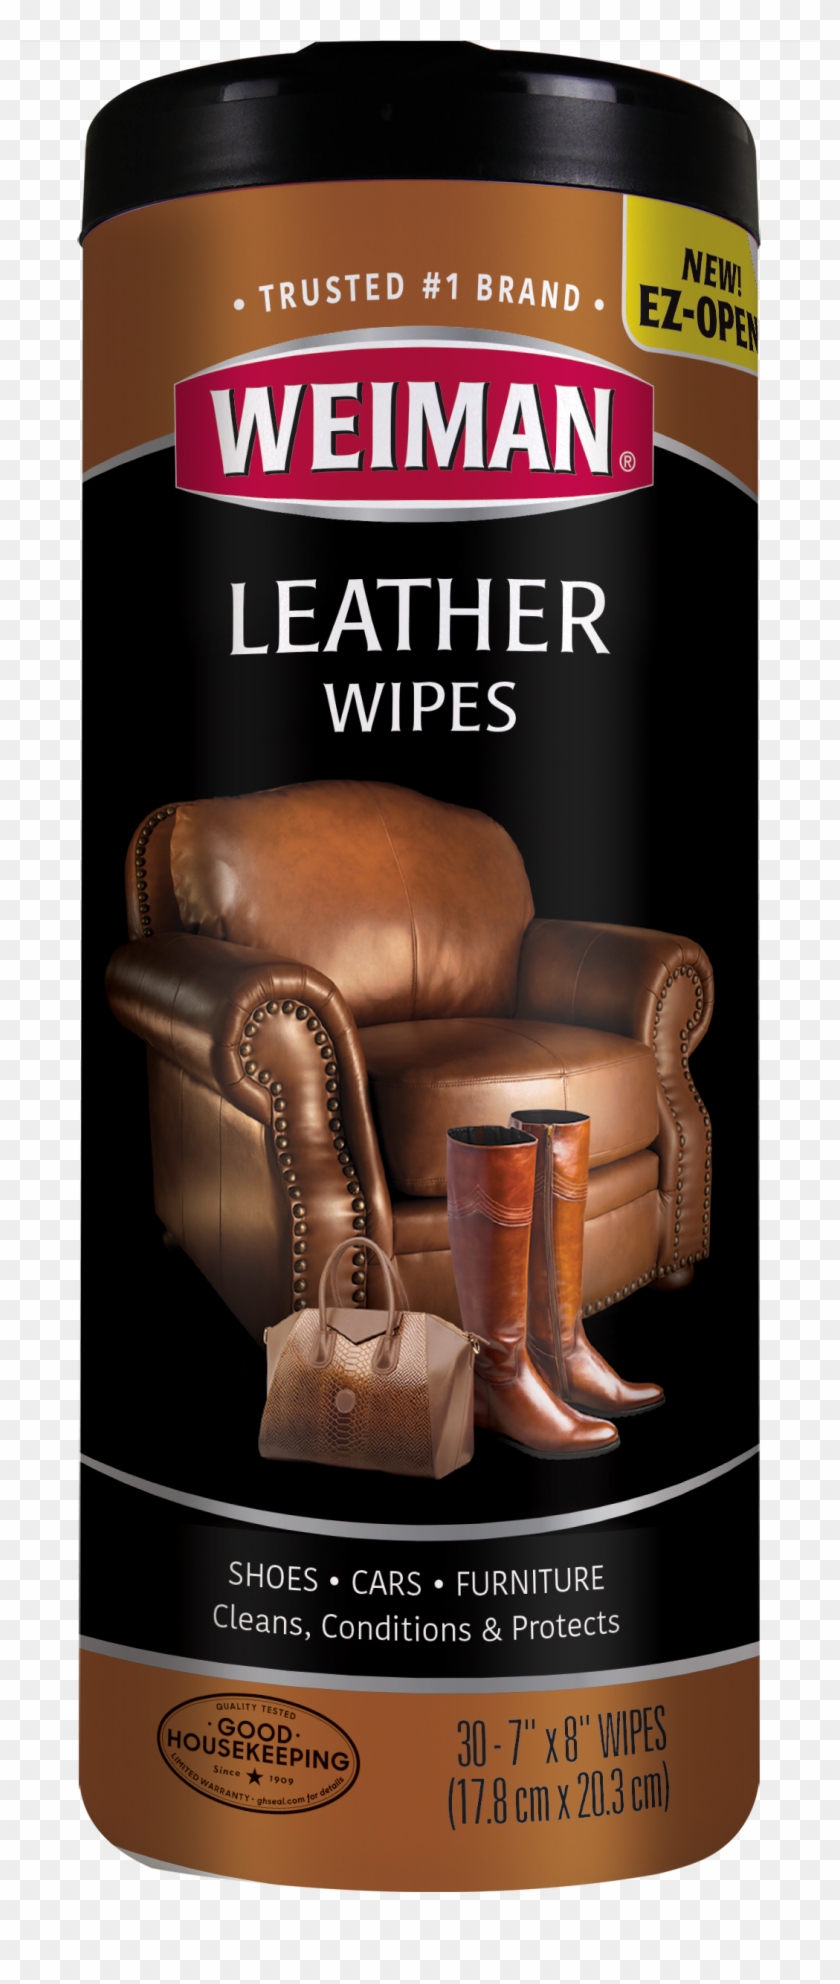 Weiman Leather Wipes Clipart #3095187